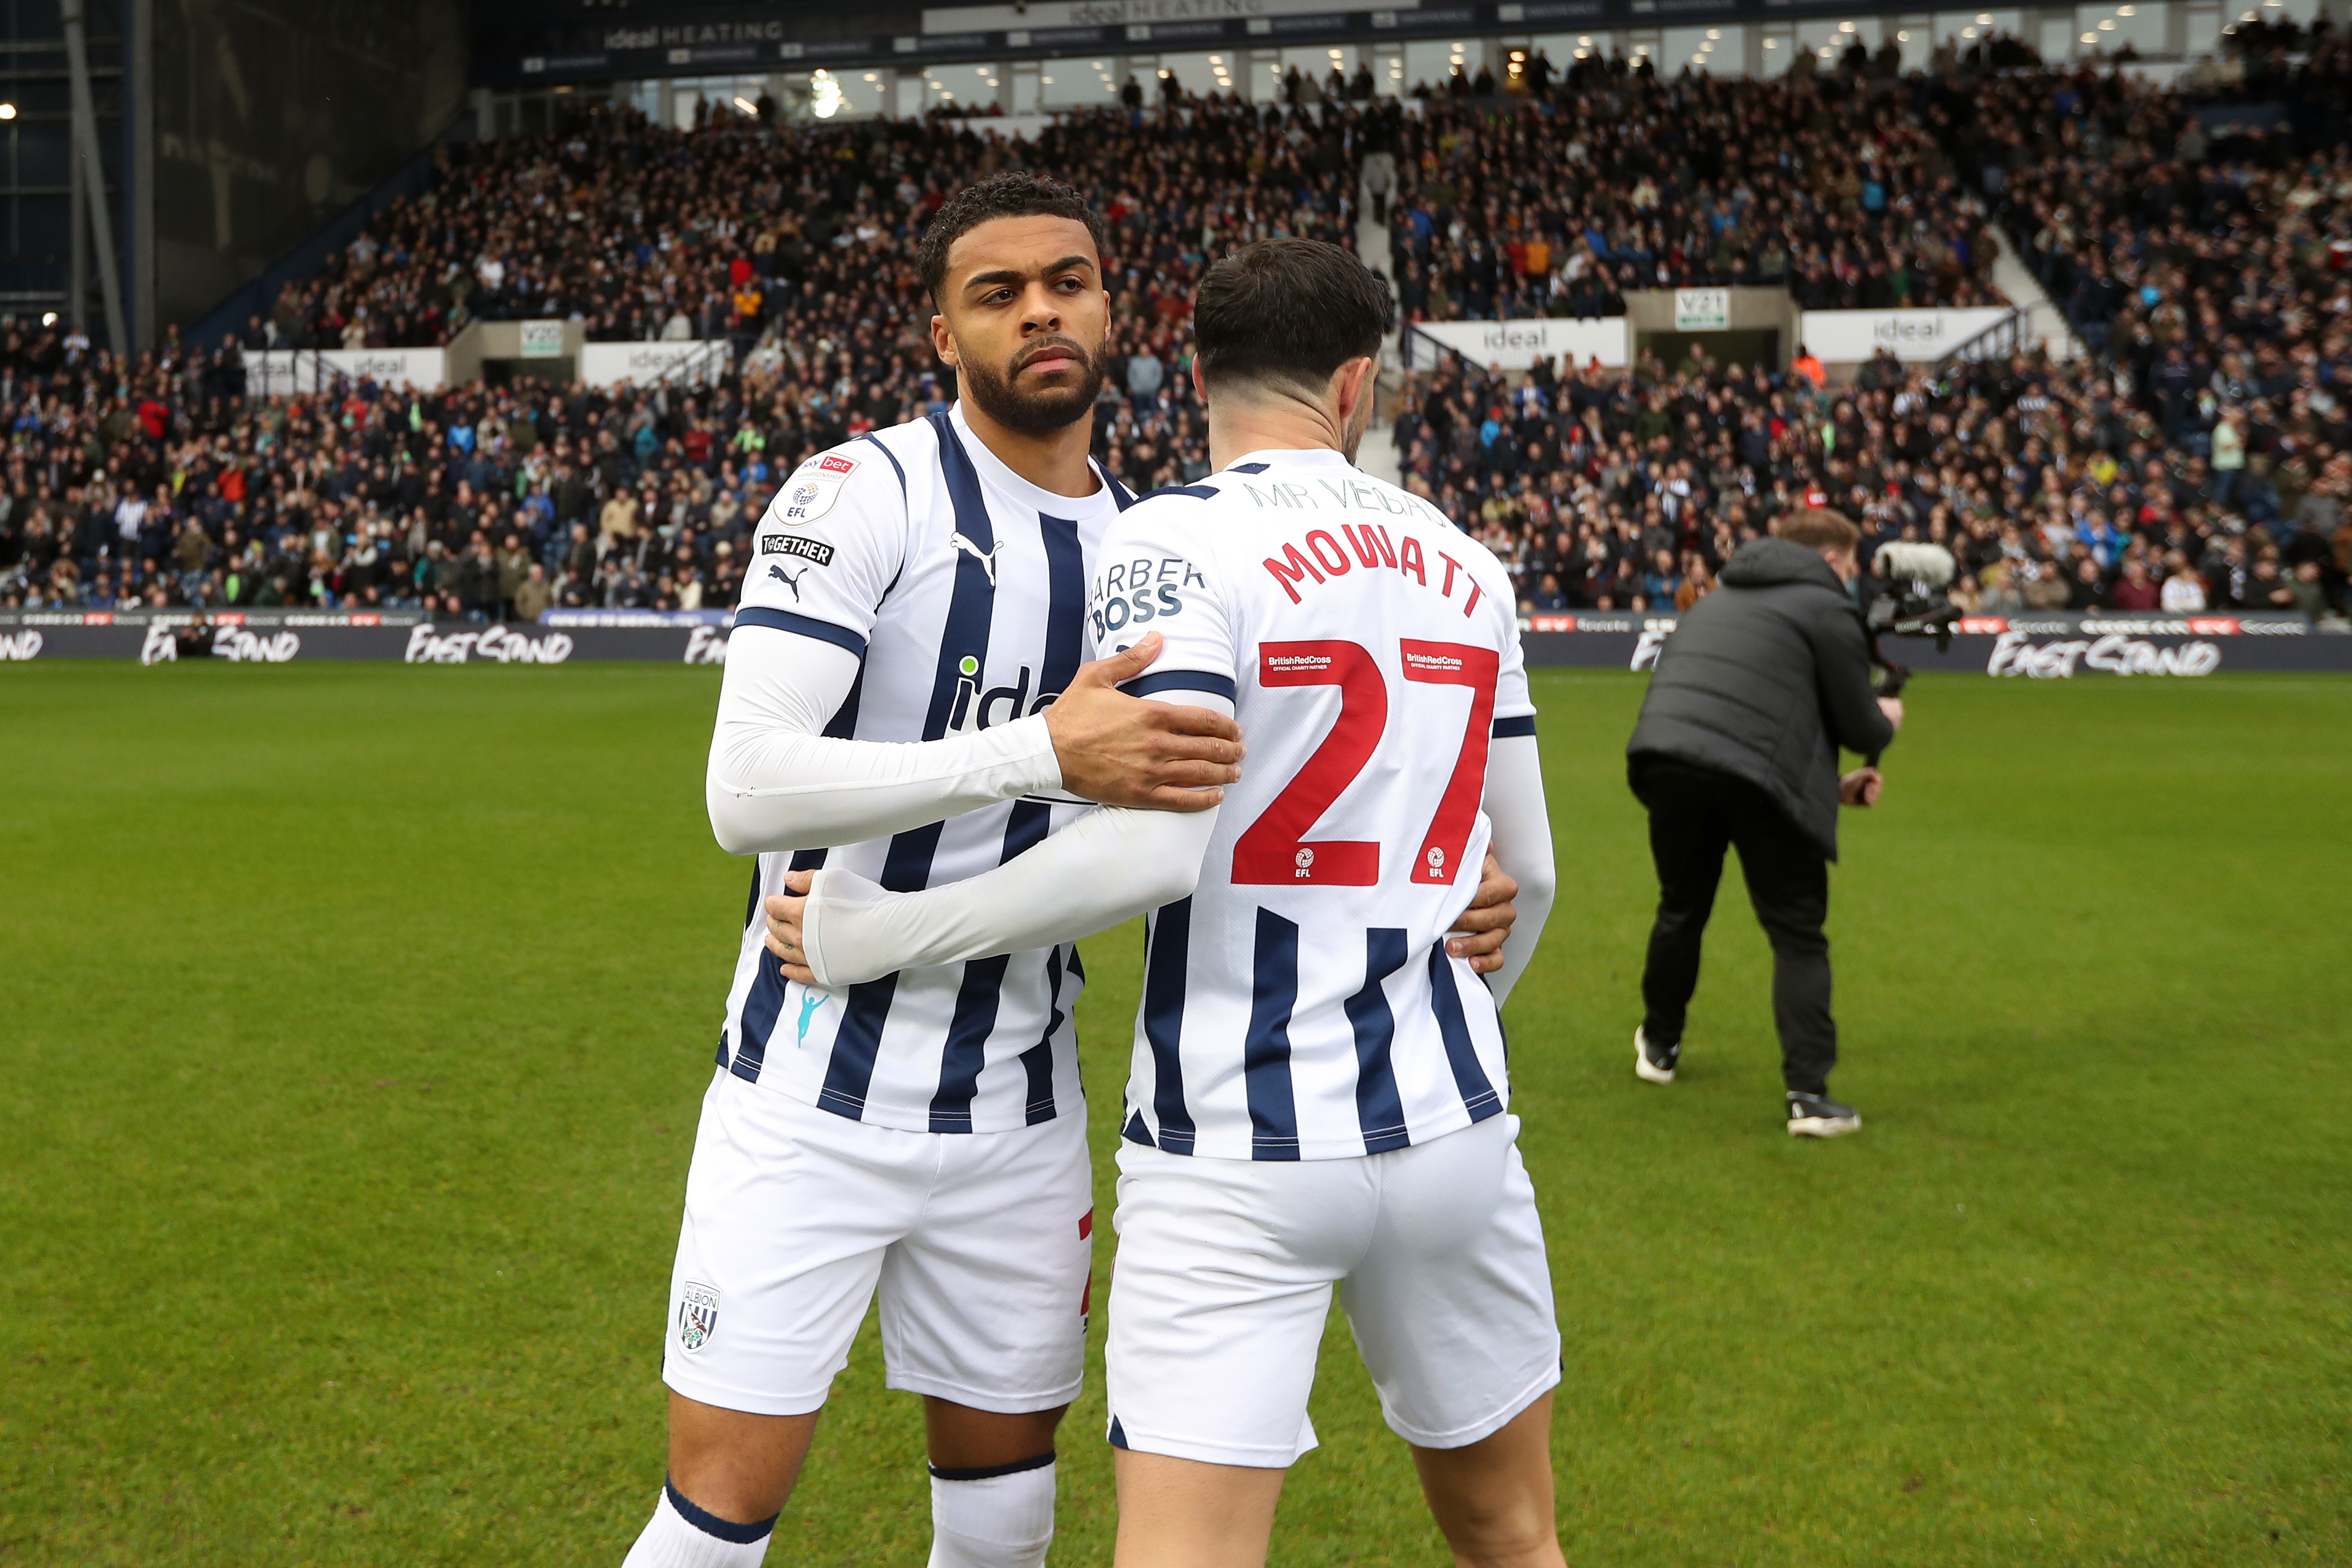 Alex Mowatt and Darnell Furlong embrace on the pitch before the game against Bristol City